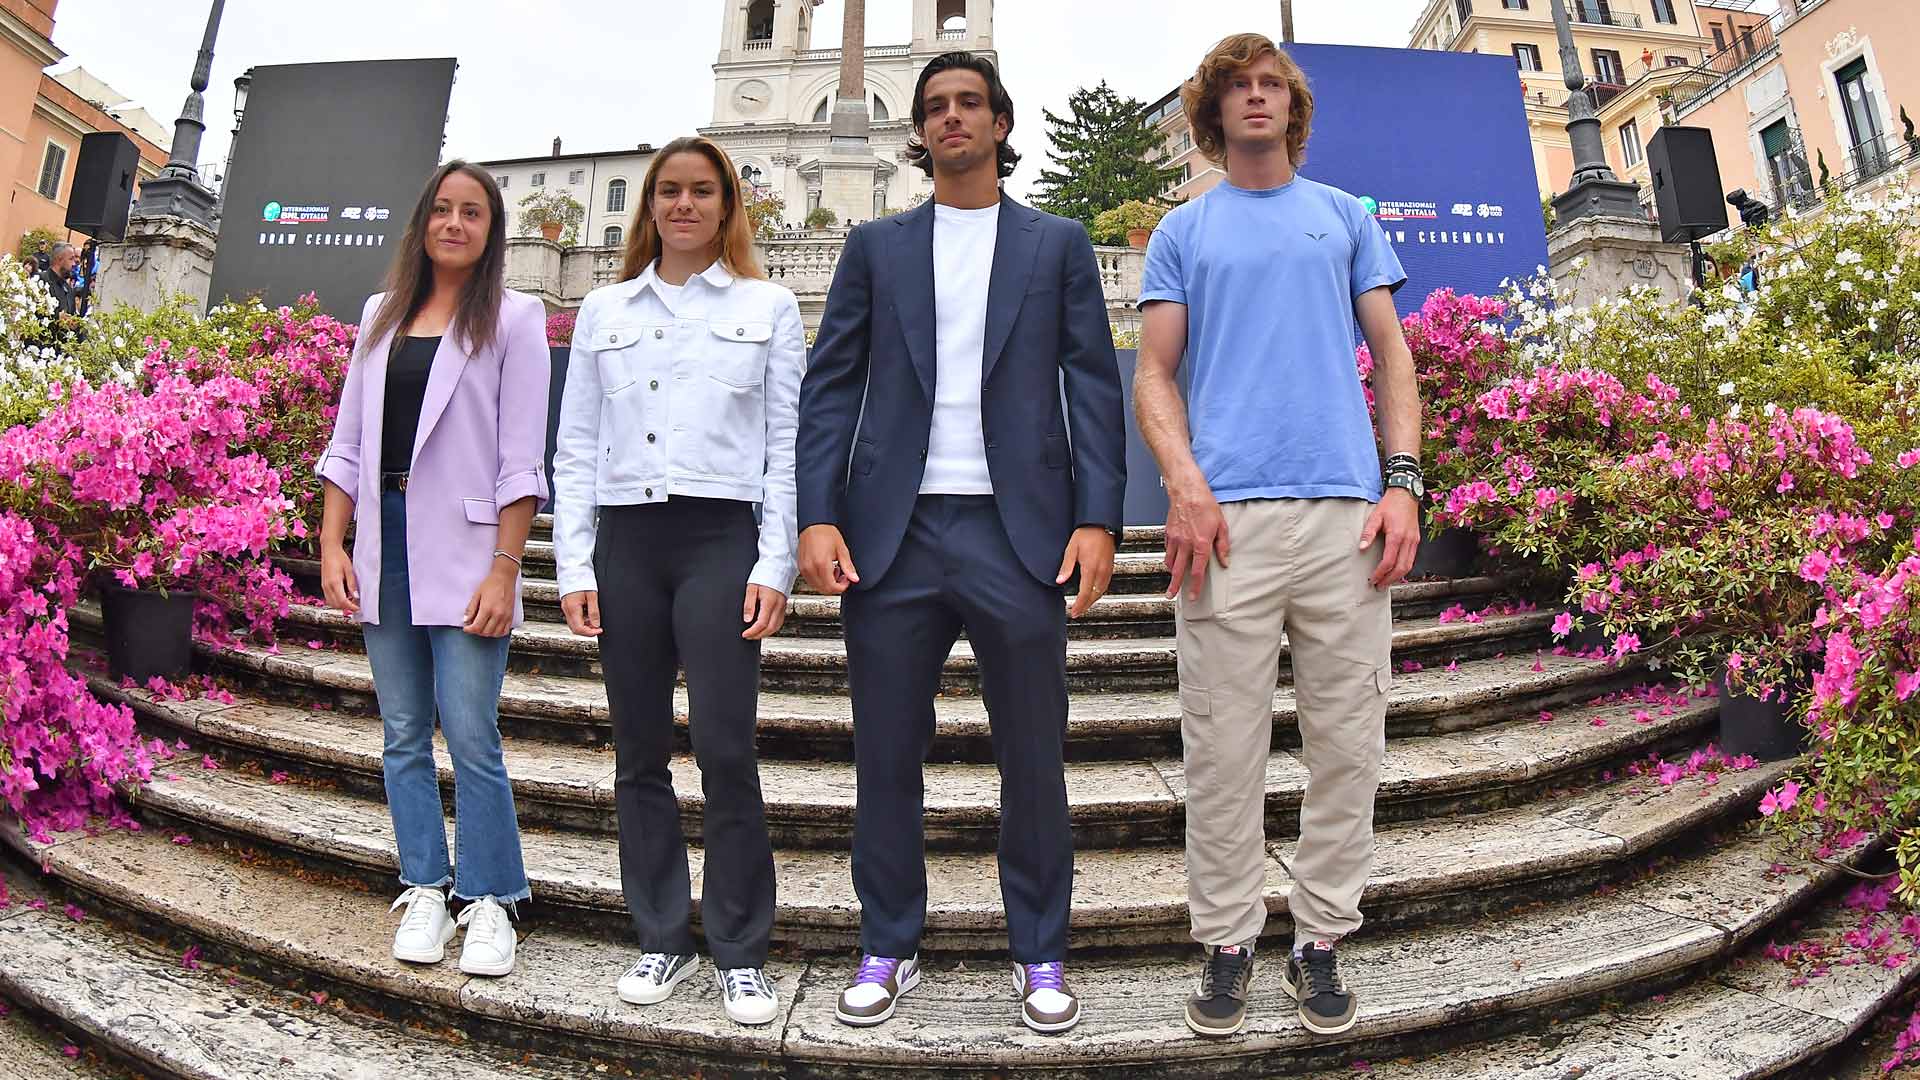 Italian Open 2022: Men's Singles Draw Preview and Rome Masters